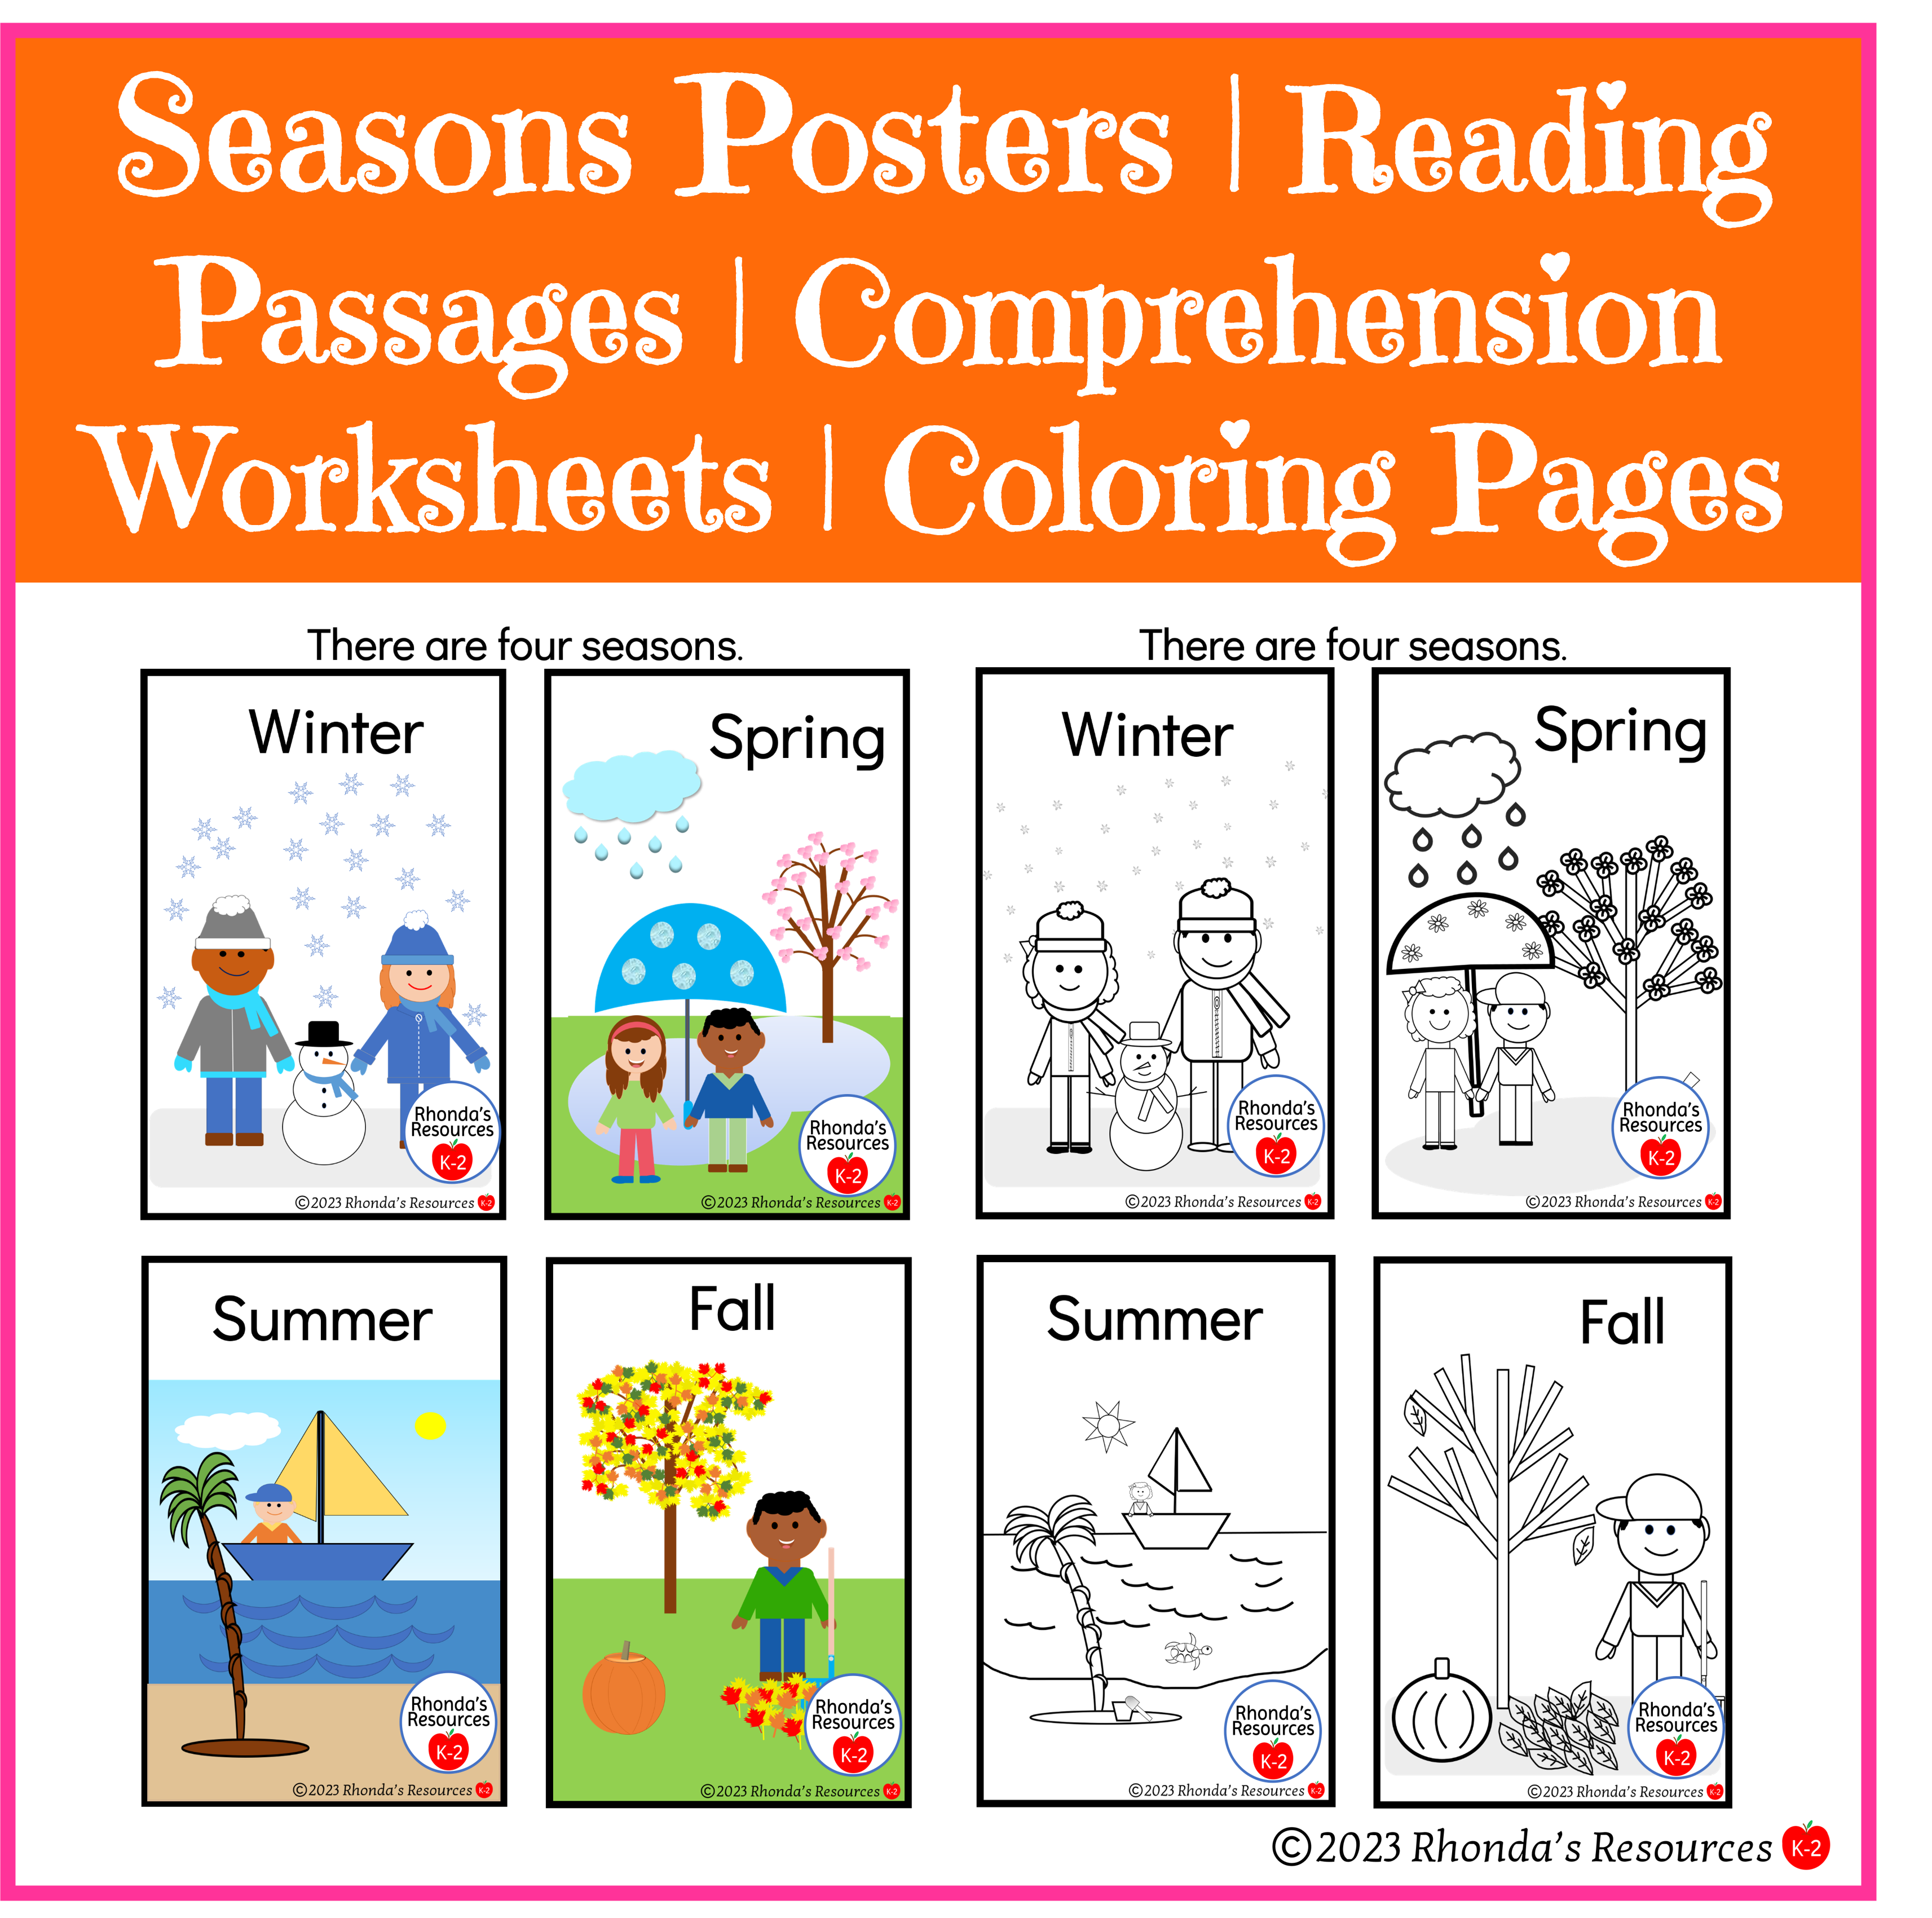 Seasons posters reading passages prehension questions coloring pages writing prompts made by teachers